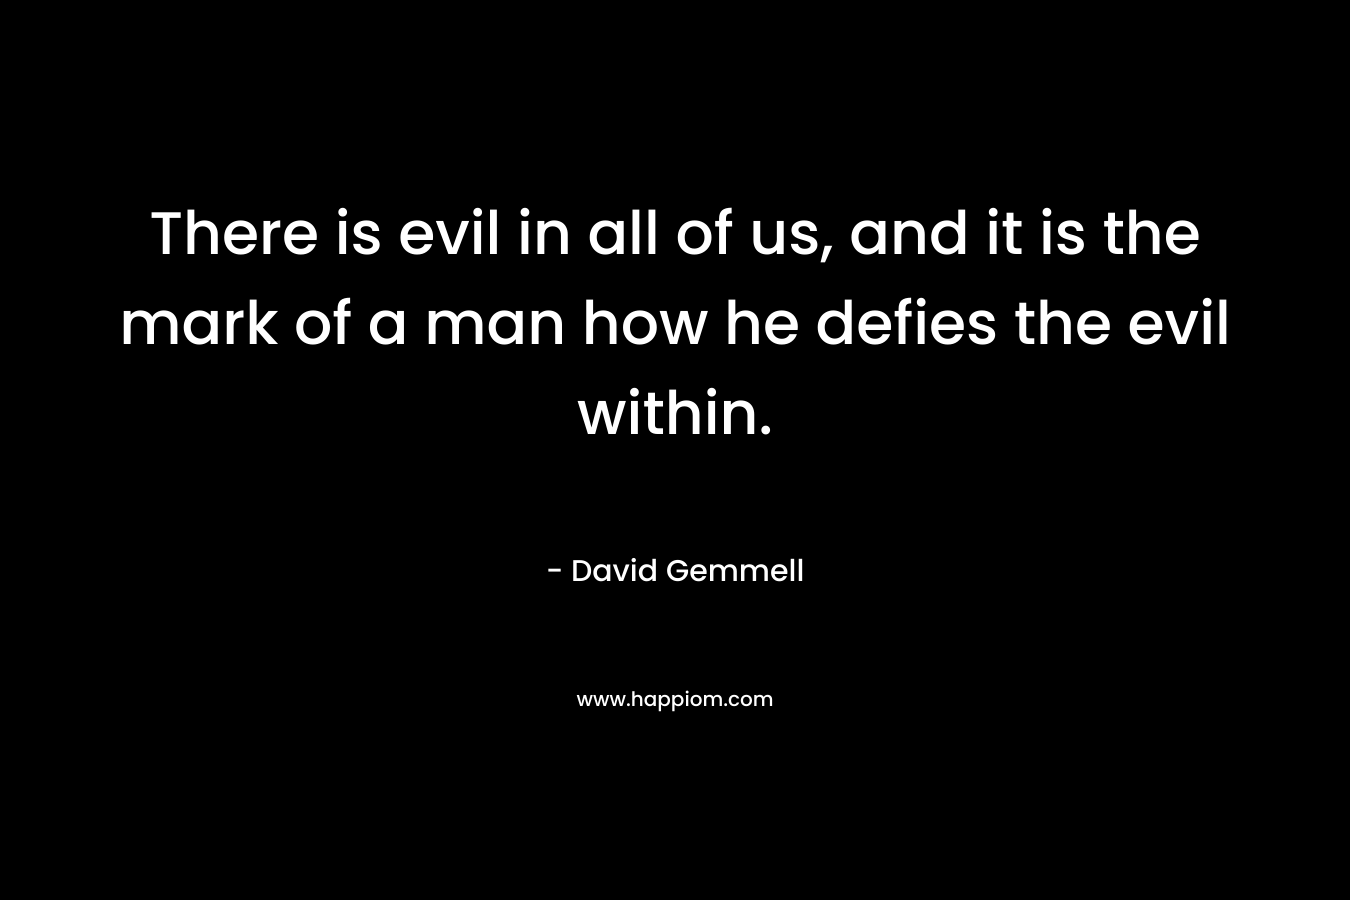 There is evil in all of us, and it is the mark of a man how he defies the evil within. – David Gemmell